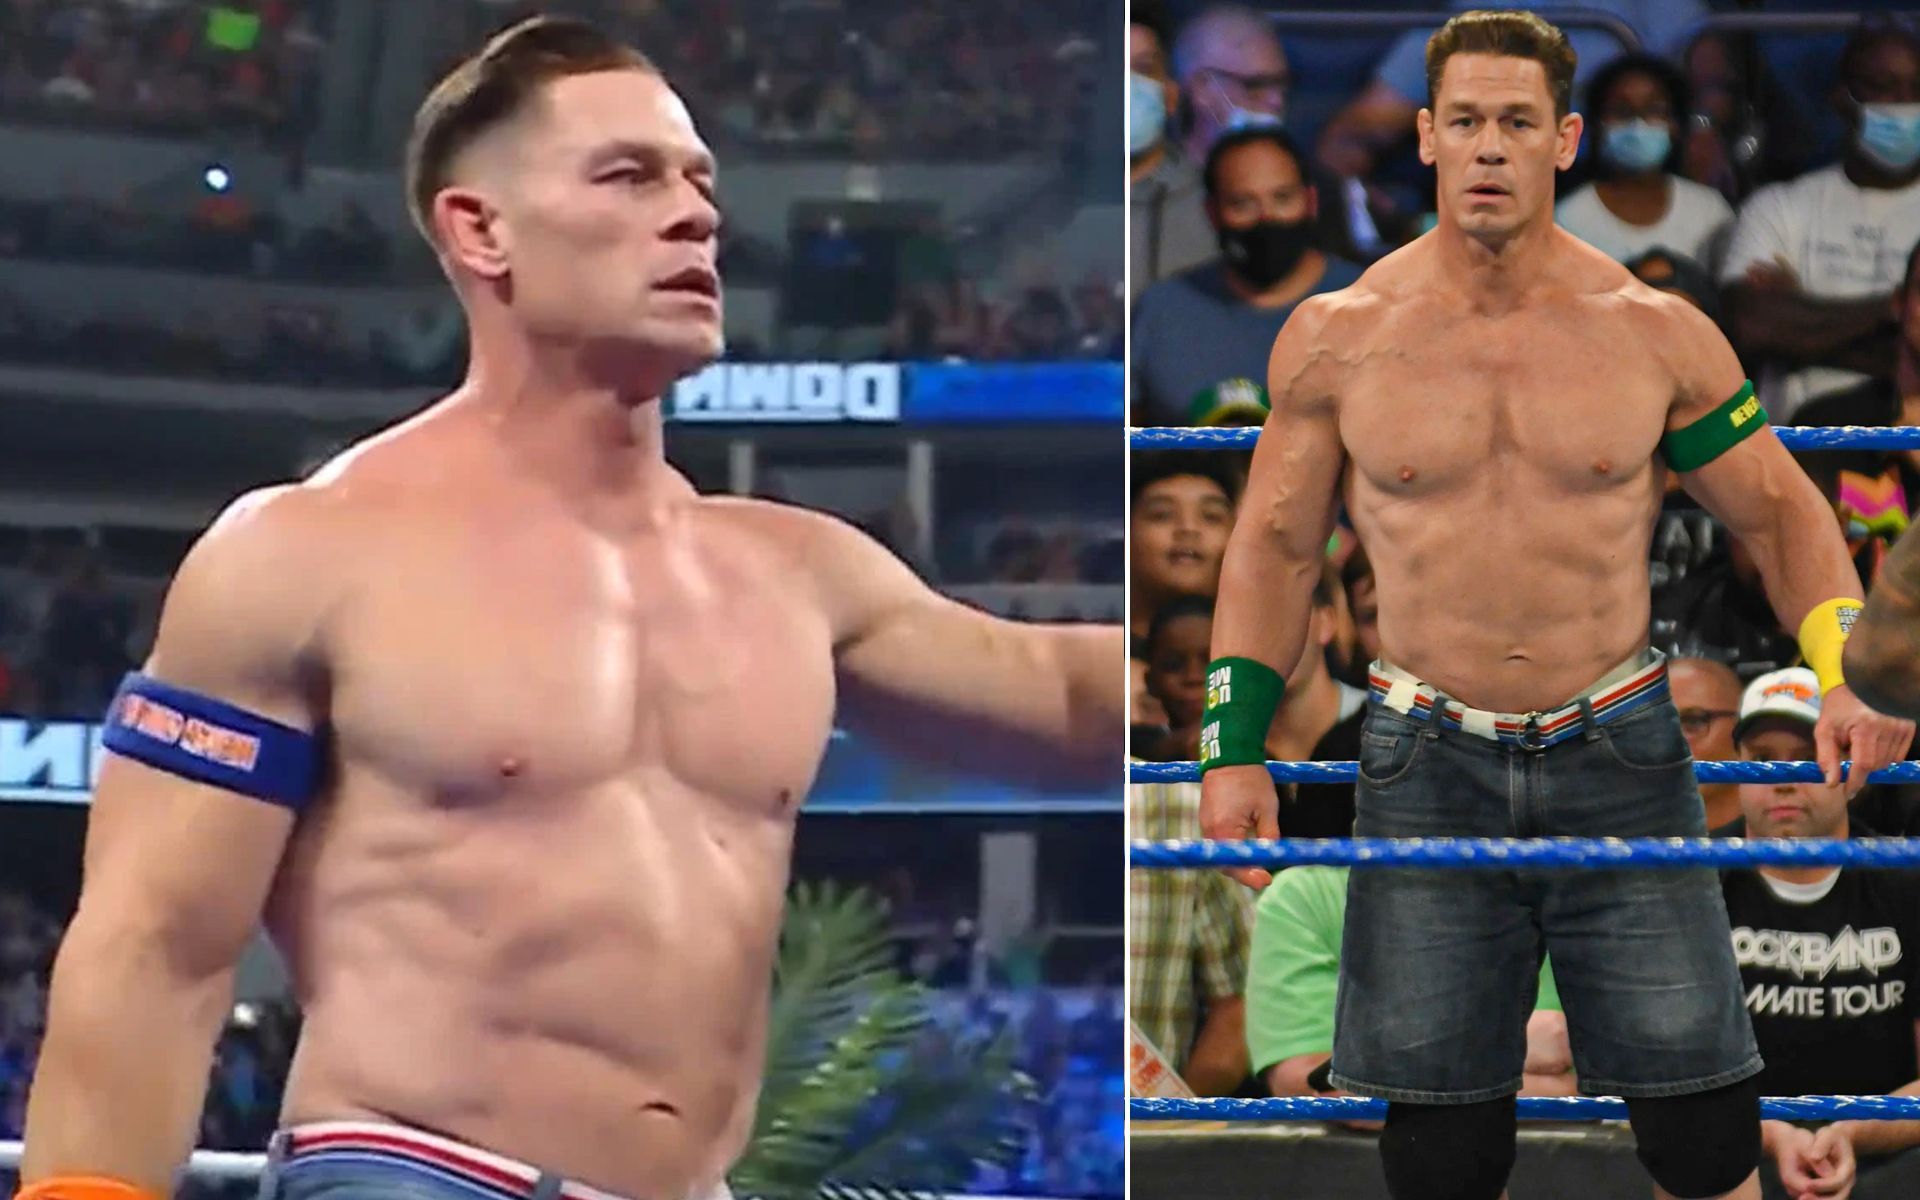 John Cena is currently assigned to WWE SmackDown